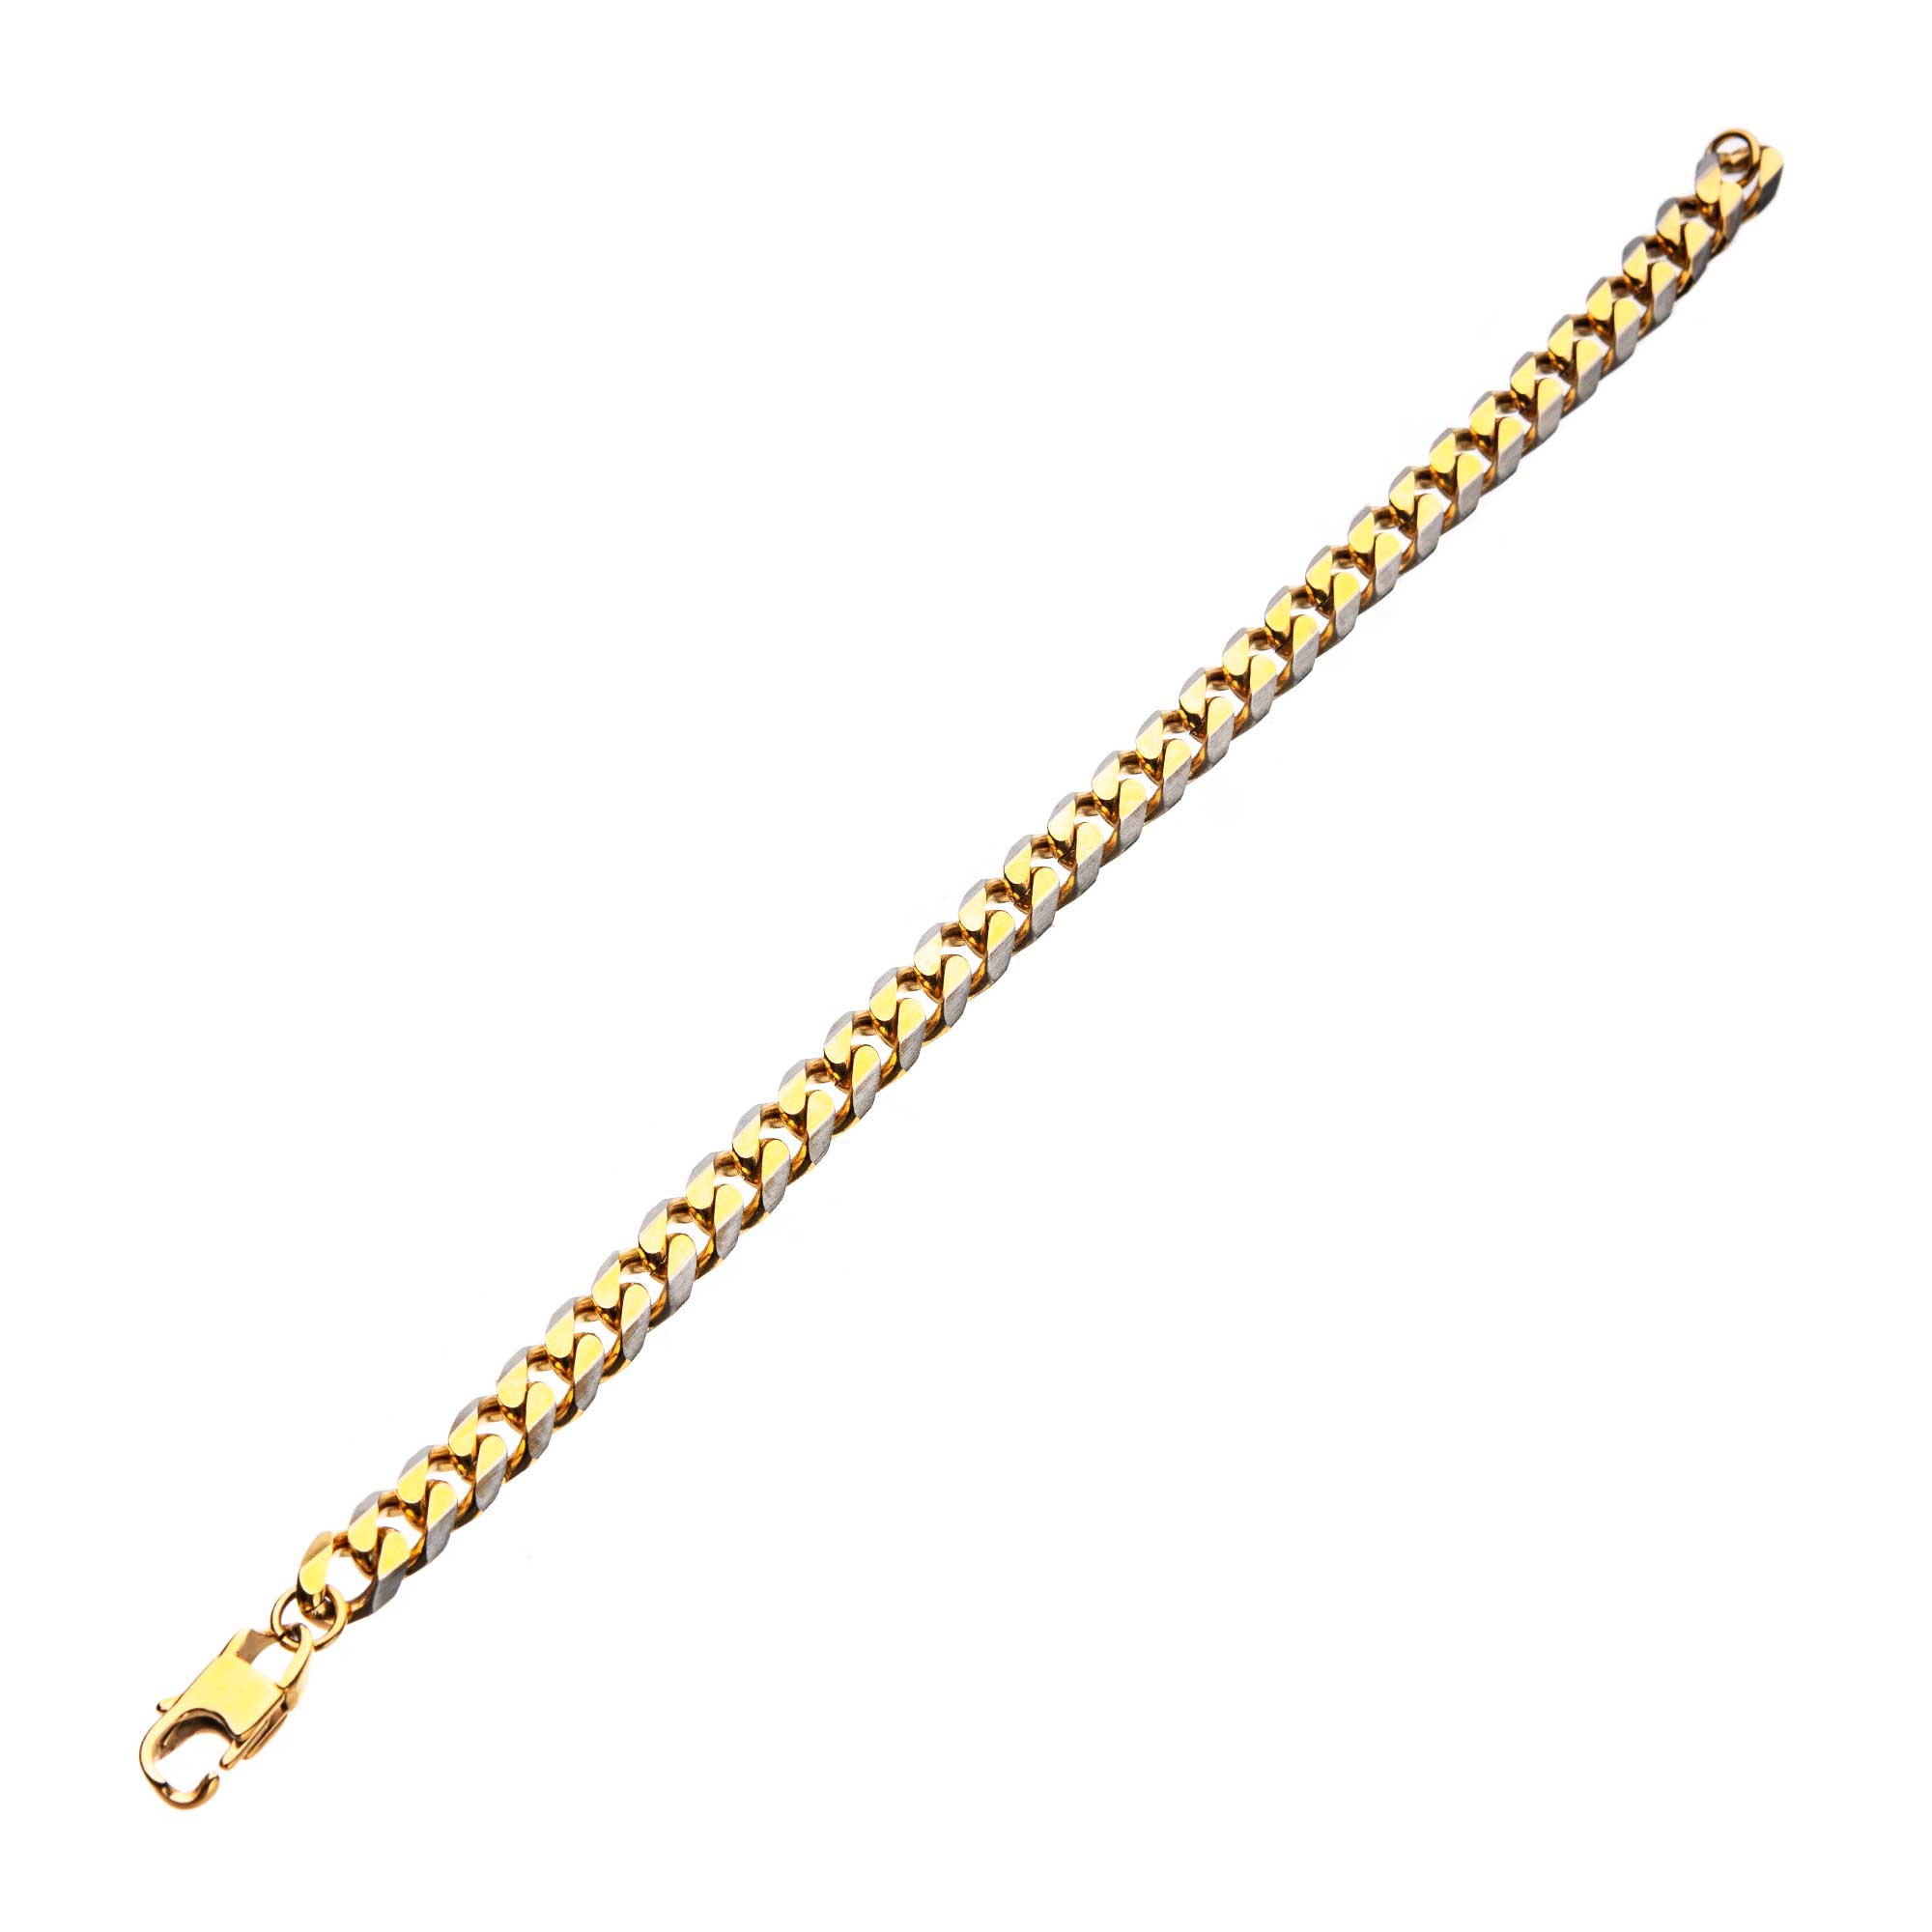 Stainless Steel Gold Plated 8mm Curb Chain with Lobster Clasp Image 4 Ken Walker Jewelers Gig Harbor, WA